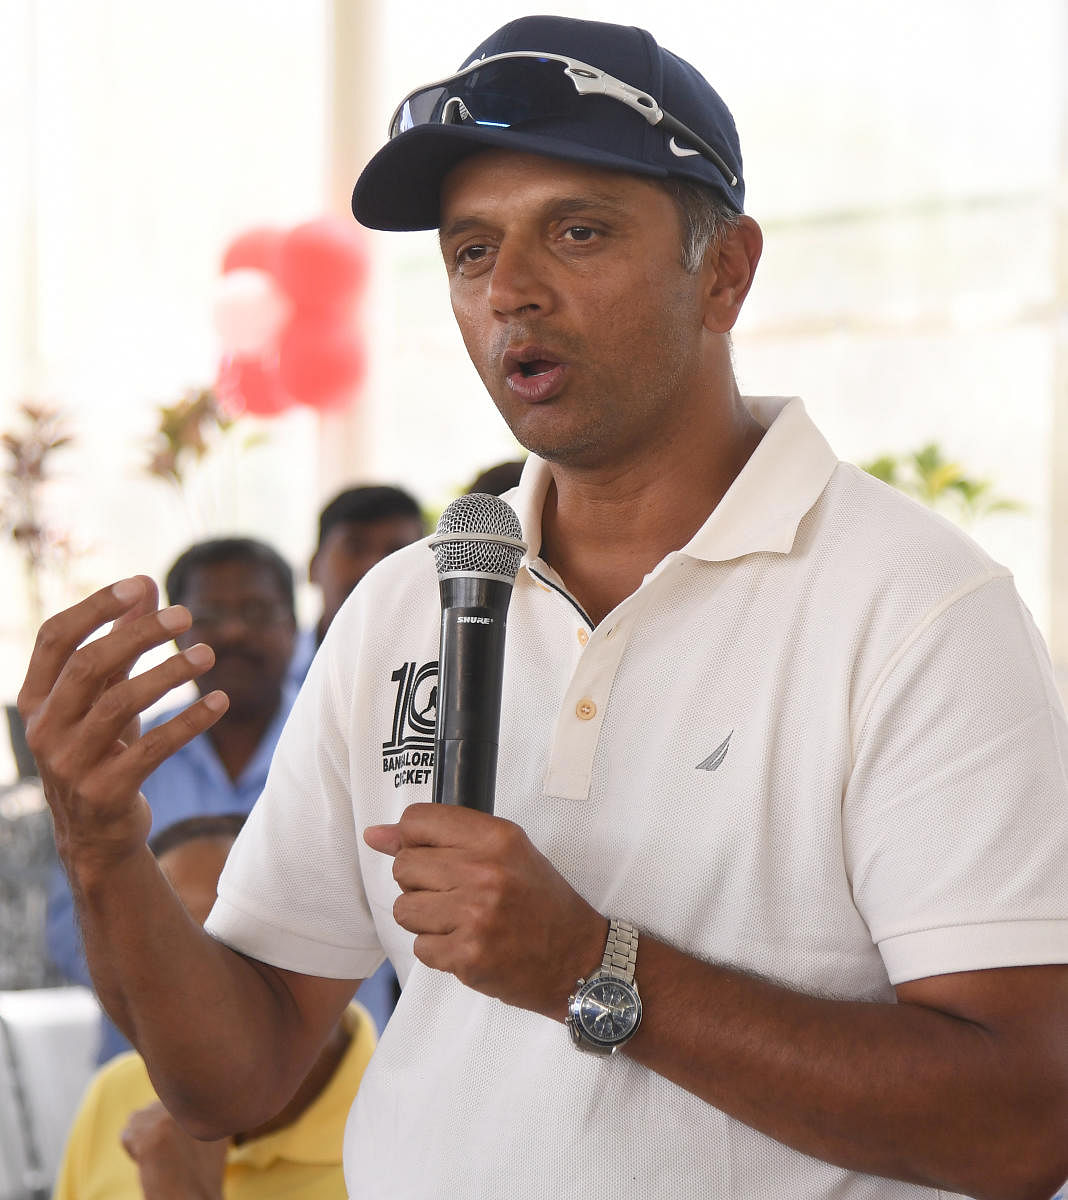 Notwithstanding the ODI series defeat to Australia, Rahul Dravid says India will be one of the favourites at the World Cup. DH Photo